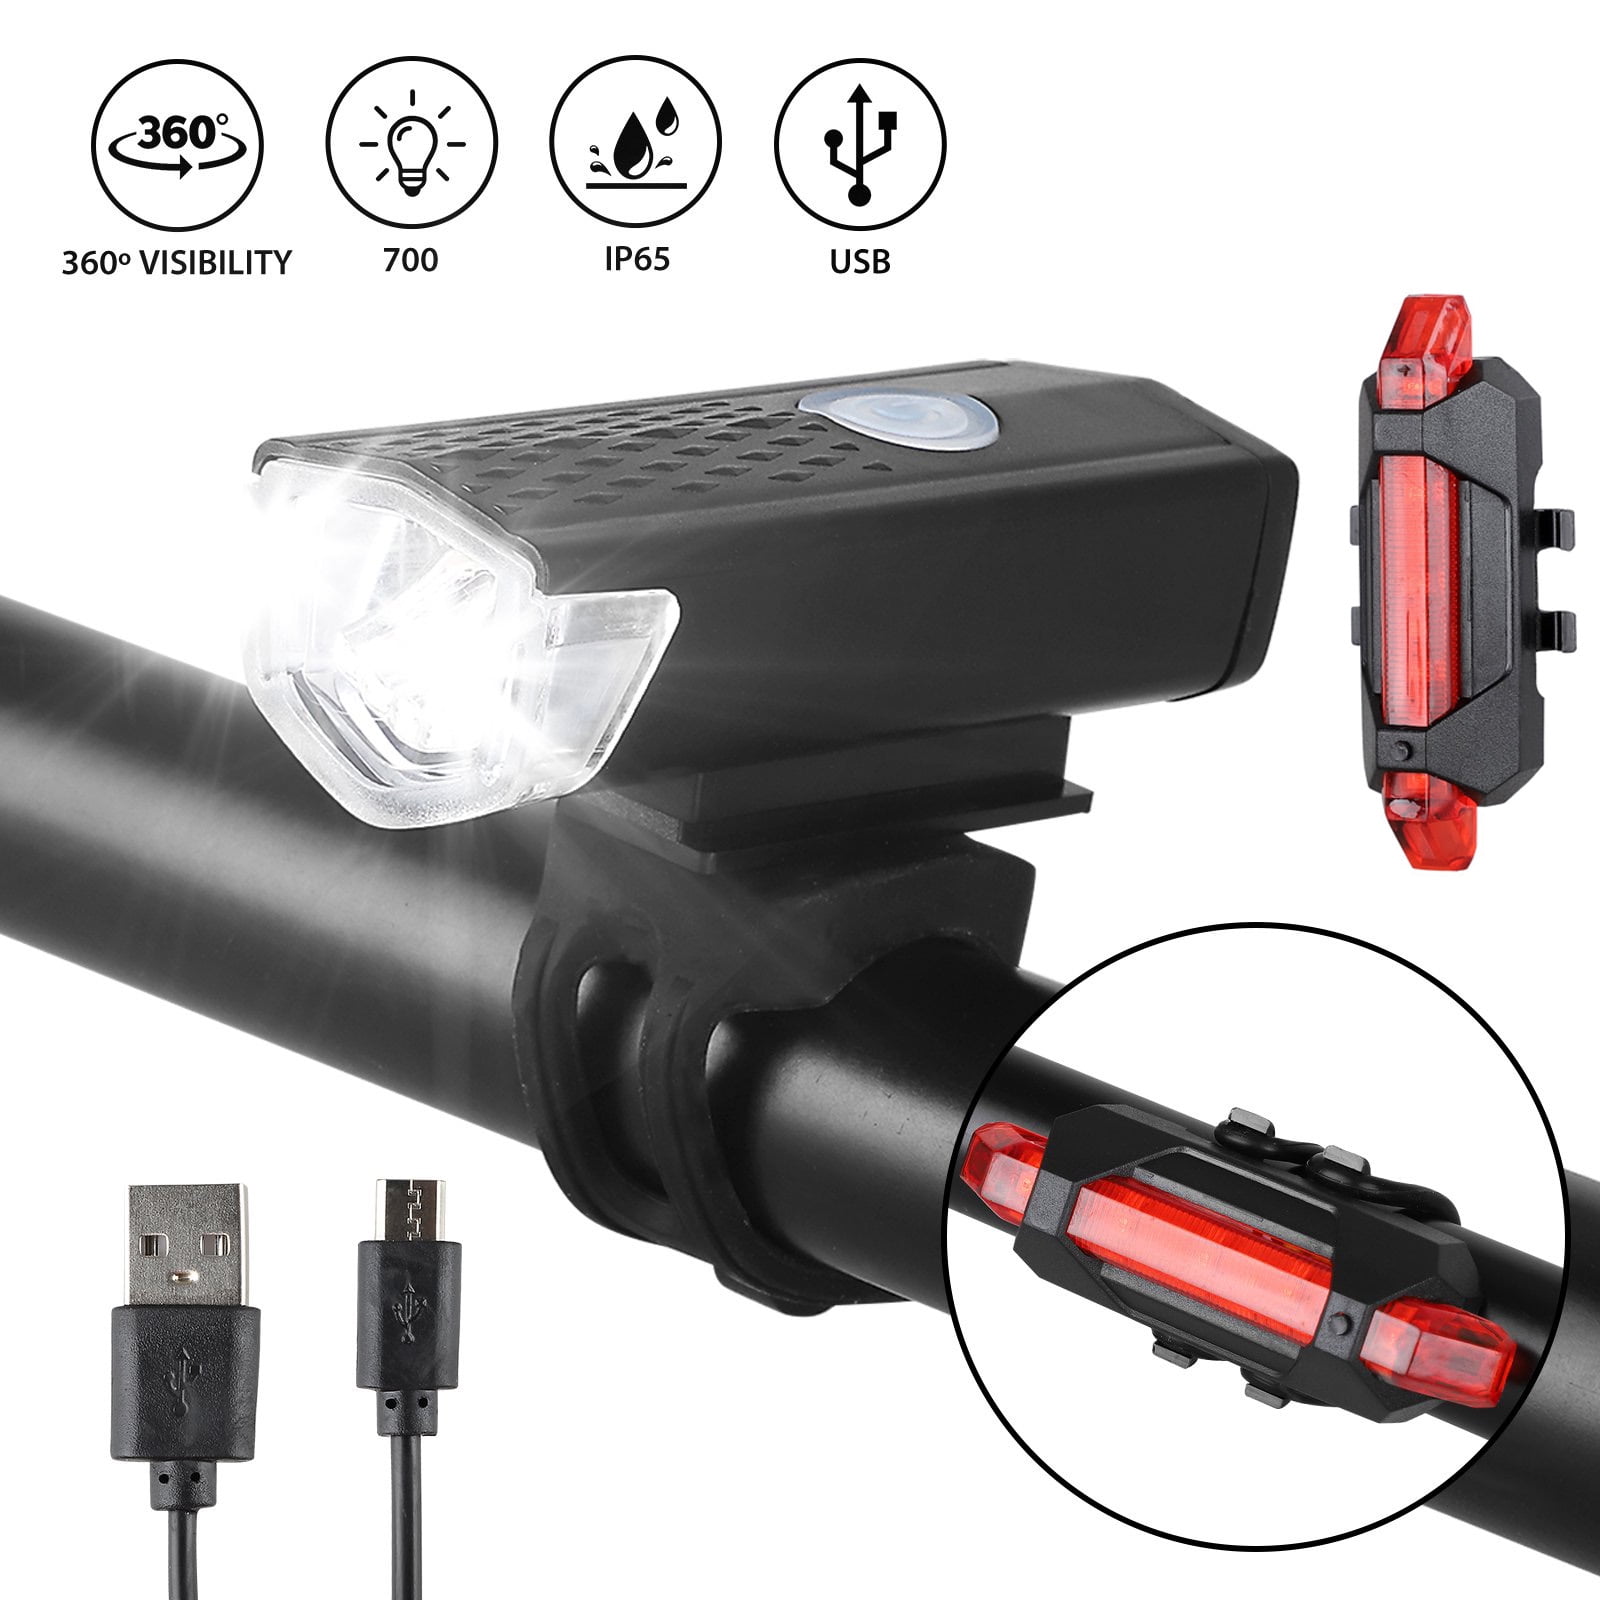 Rechargeable Mountain Bike Lights Bicycle Headlight Torch Front & Rear Lamp Set